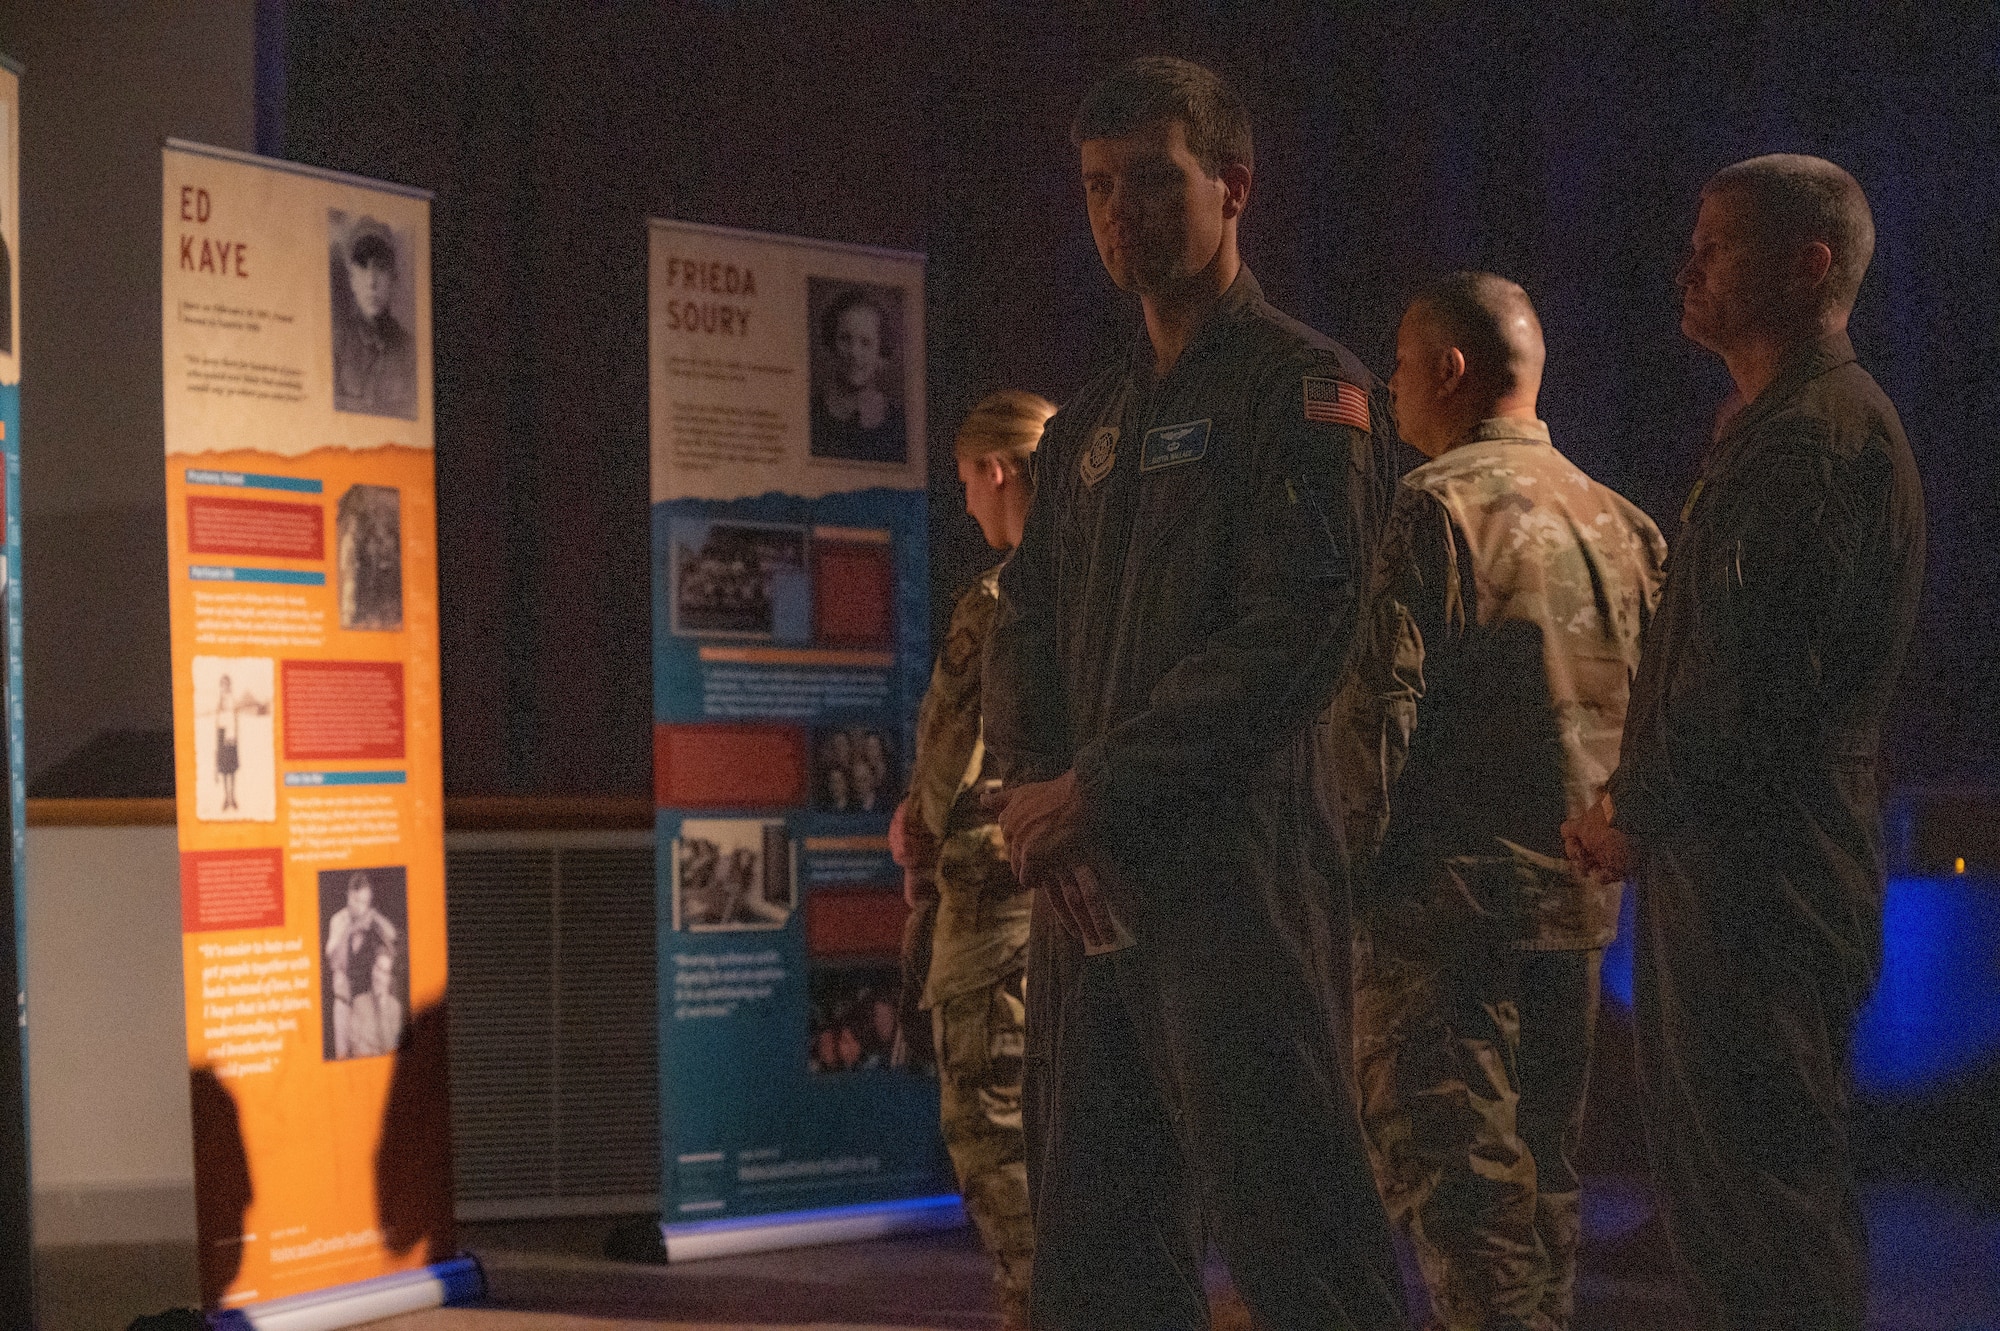 U.S. Air Force Airmen read about the history of the Holocaust at the Holocaust Remembrance Day ceremony at Joint Base Lewis-McChord, Washington, April 28, 2022. The ceremony gave Airmen the opportunity to learn about the Holocaust and experiences of survivors. (U.S. Air Force photo by Airman 1st Class Charles Casner)